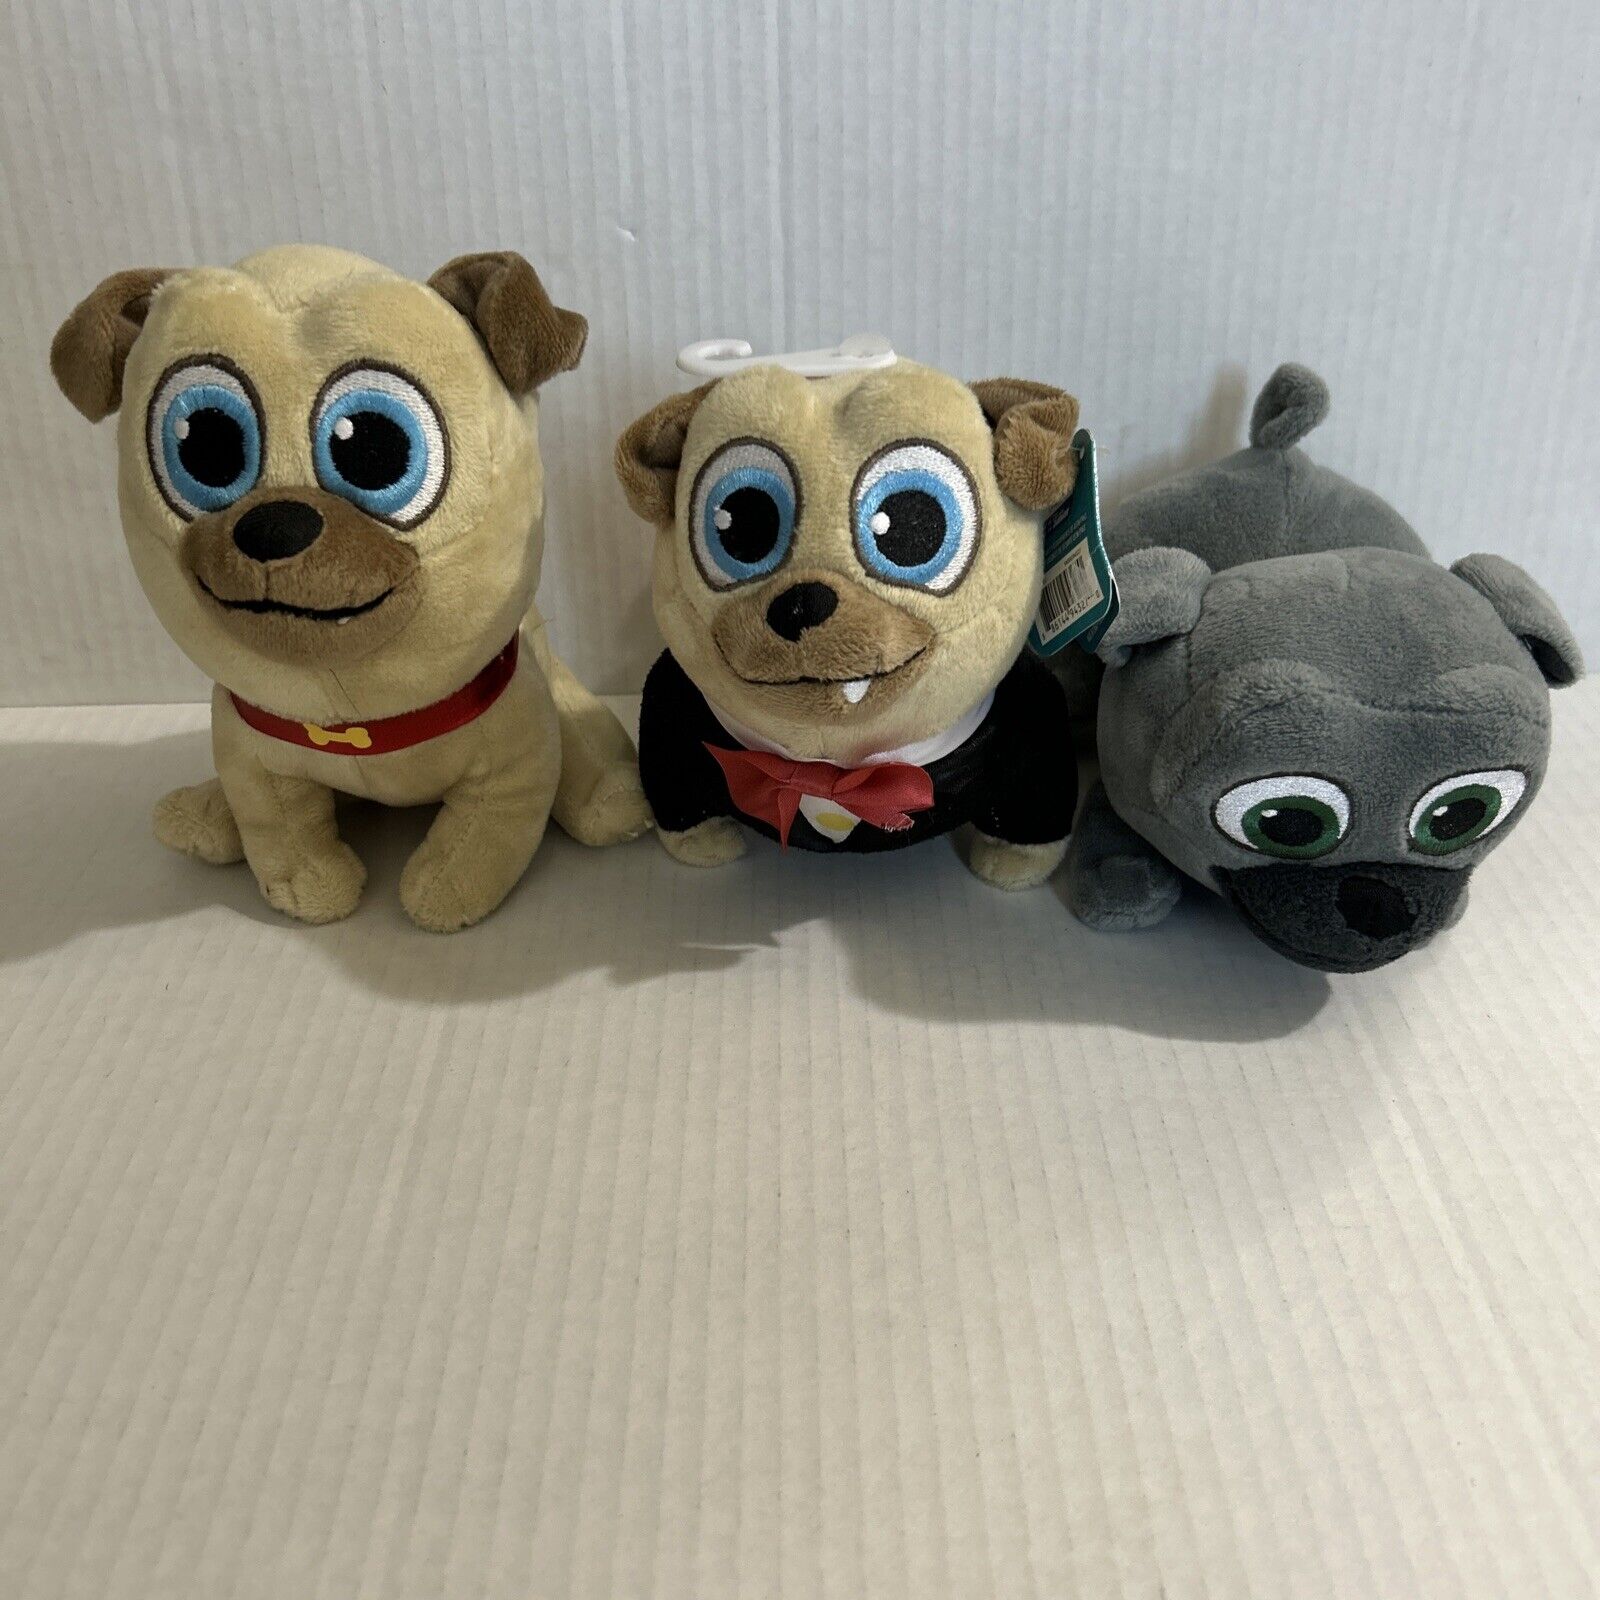 Lot of 3 Disney Puppy Dog Pals Formal Plush ROLLY and BINGO Stuffed Toy 6\